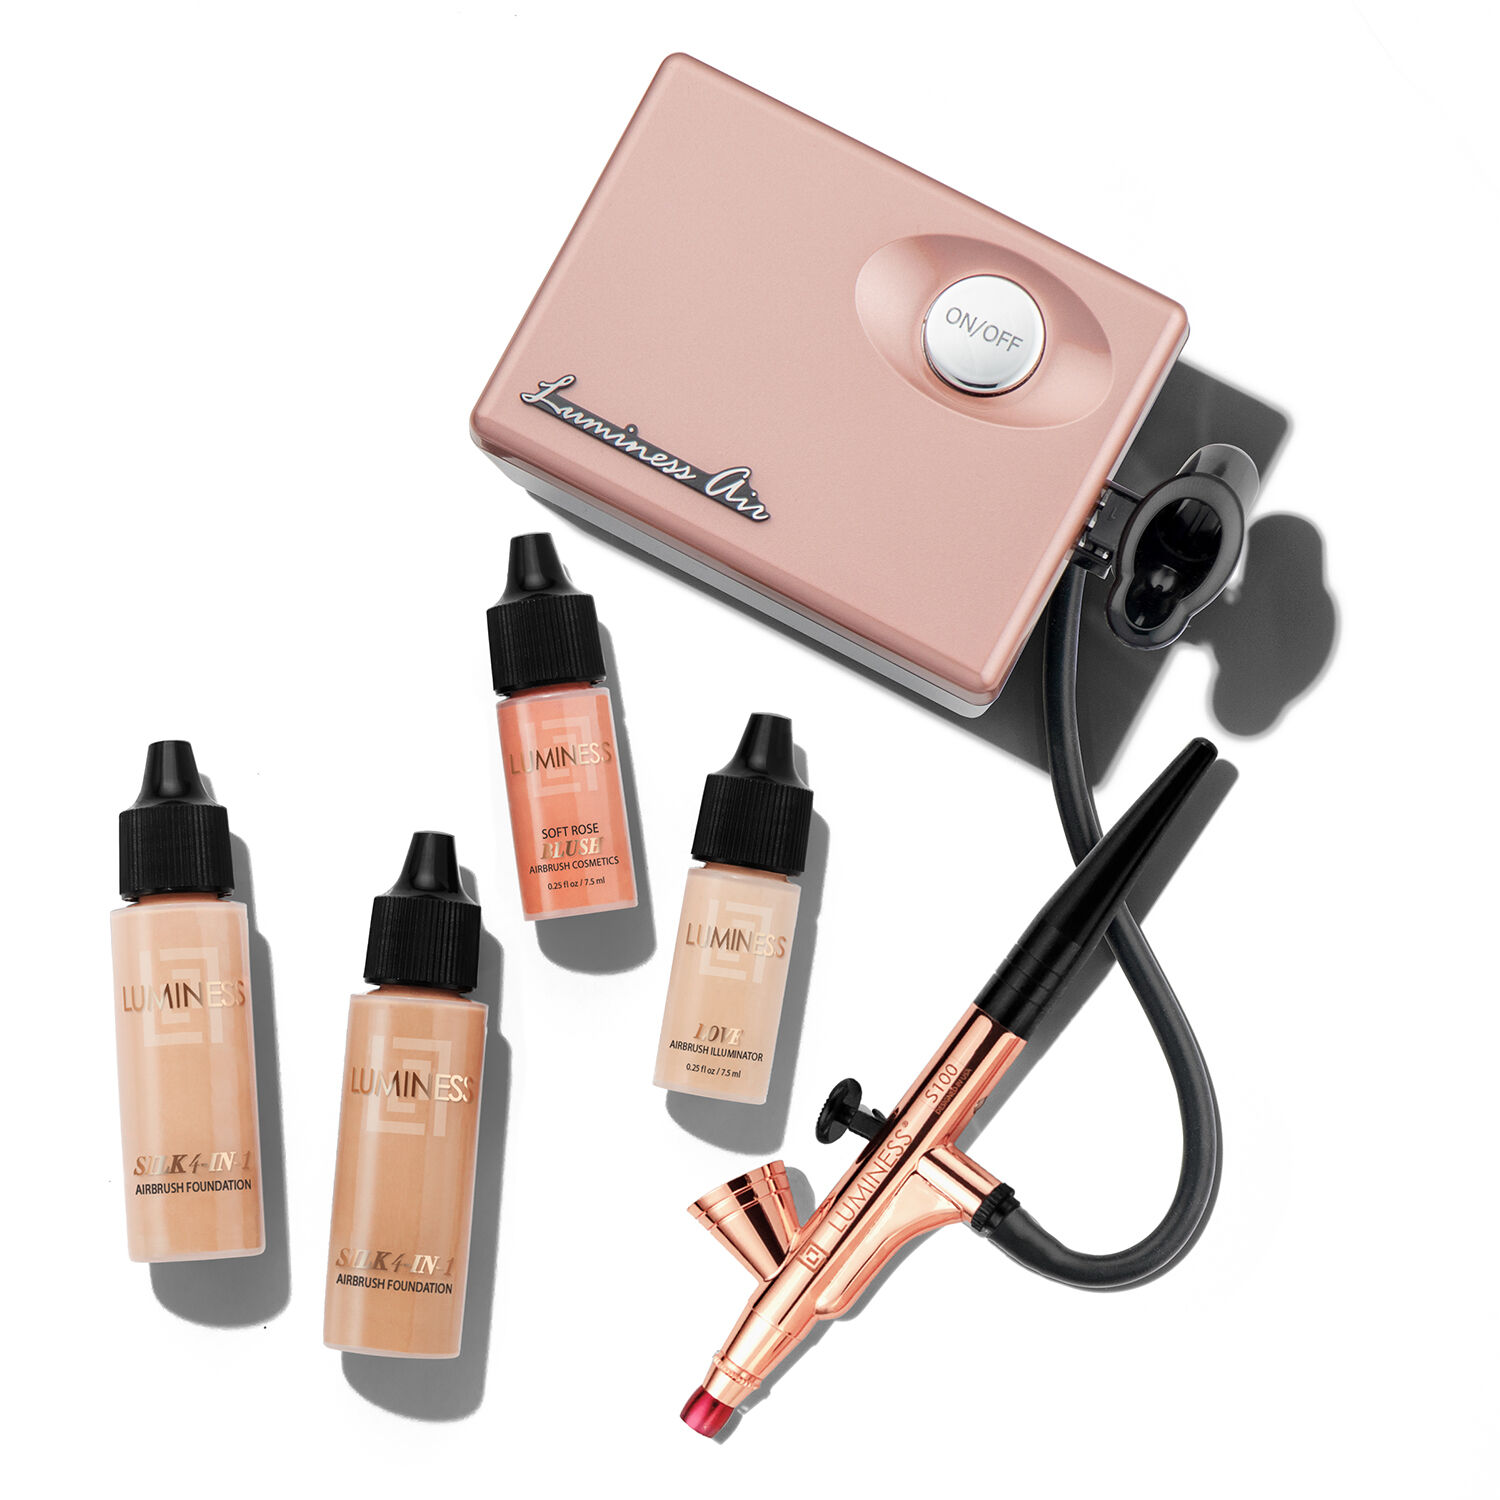 Beauty Review: Luminess Air Airbrush Makeup System